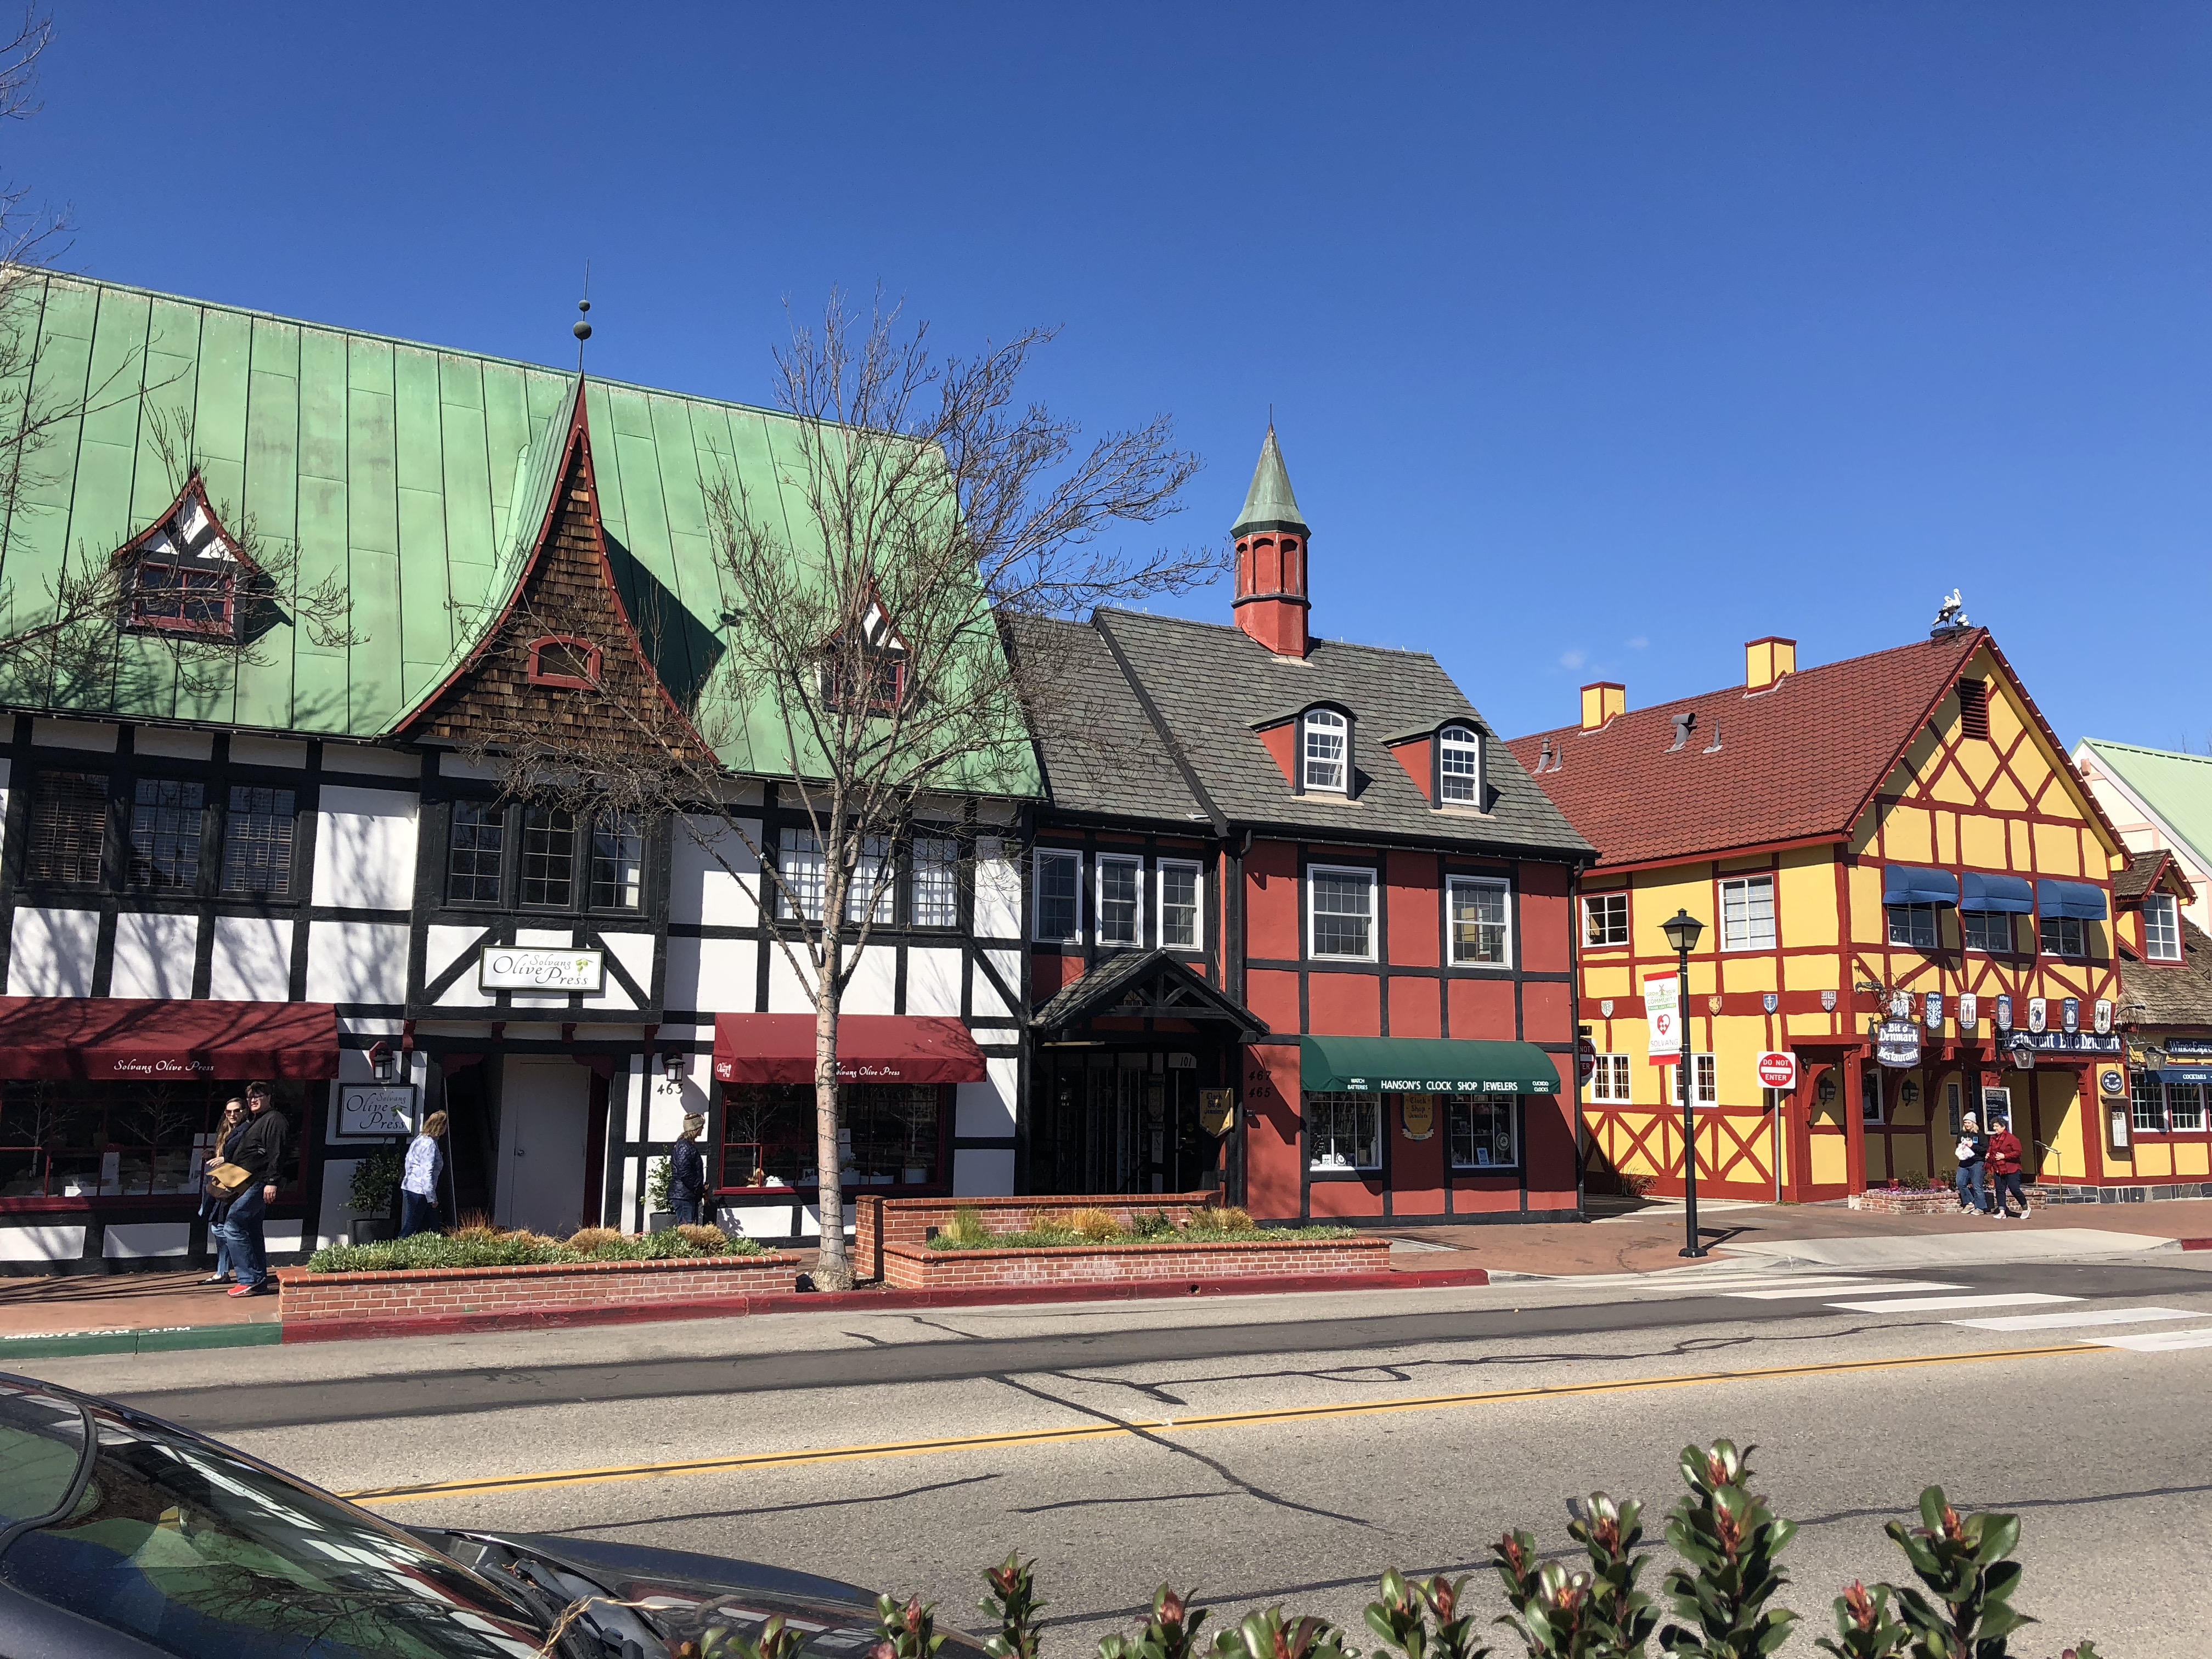 Colorful buildings on a street in Solvang